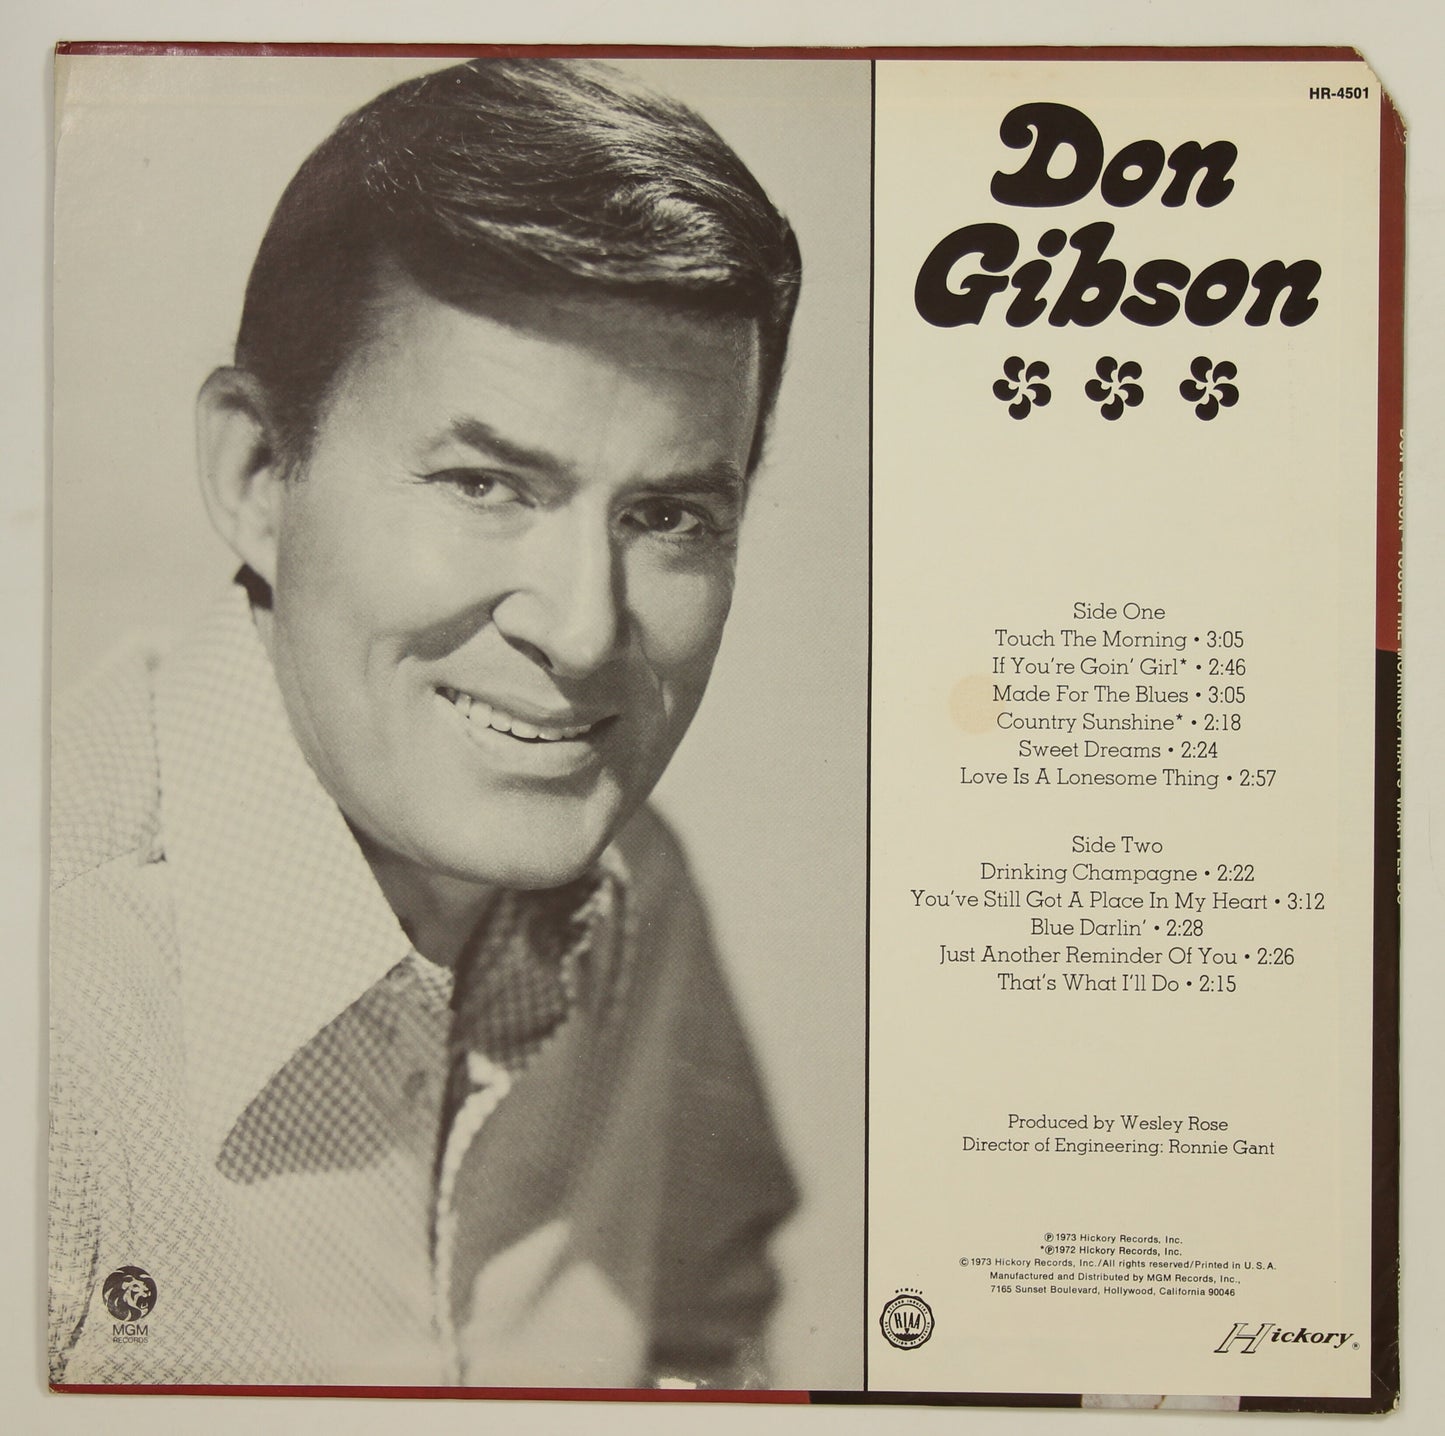 DON GIBSON / TOUCH THE MORNING